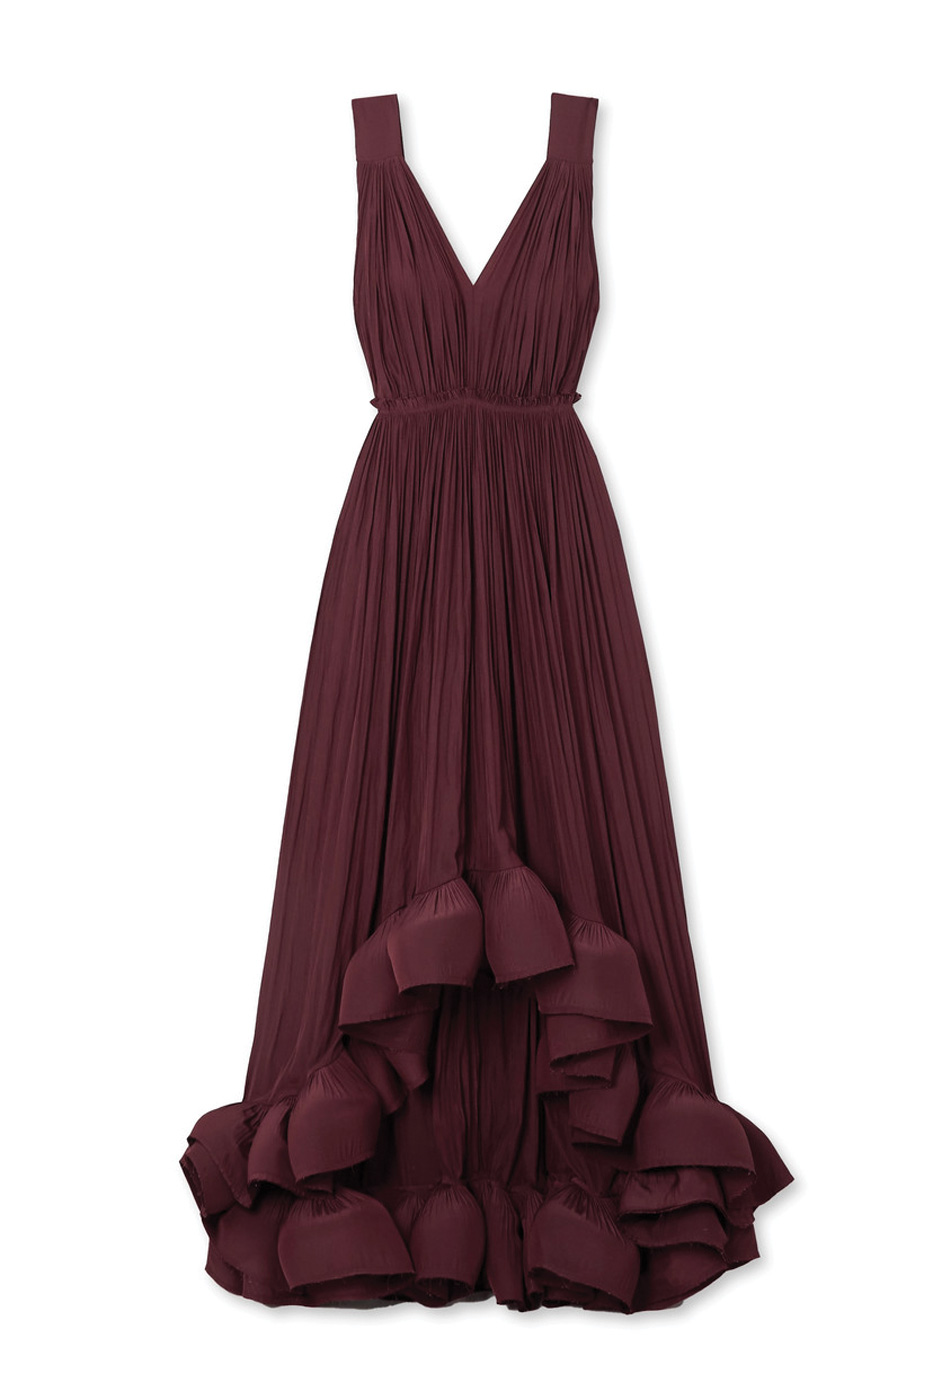 32 Lanvin, Pleated Ruffled Crepe Gown, Net A Porter